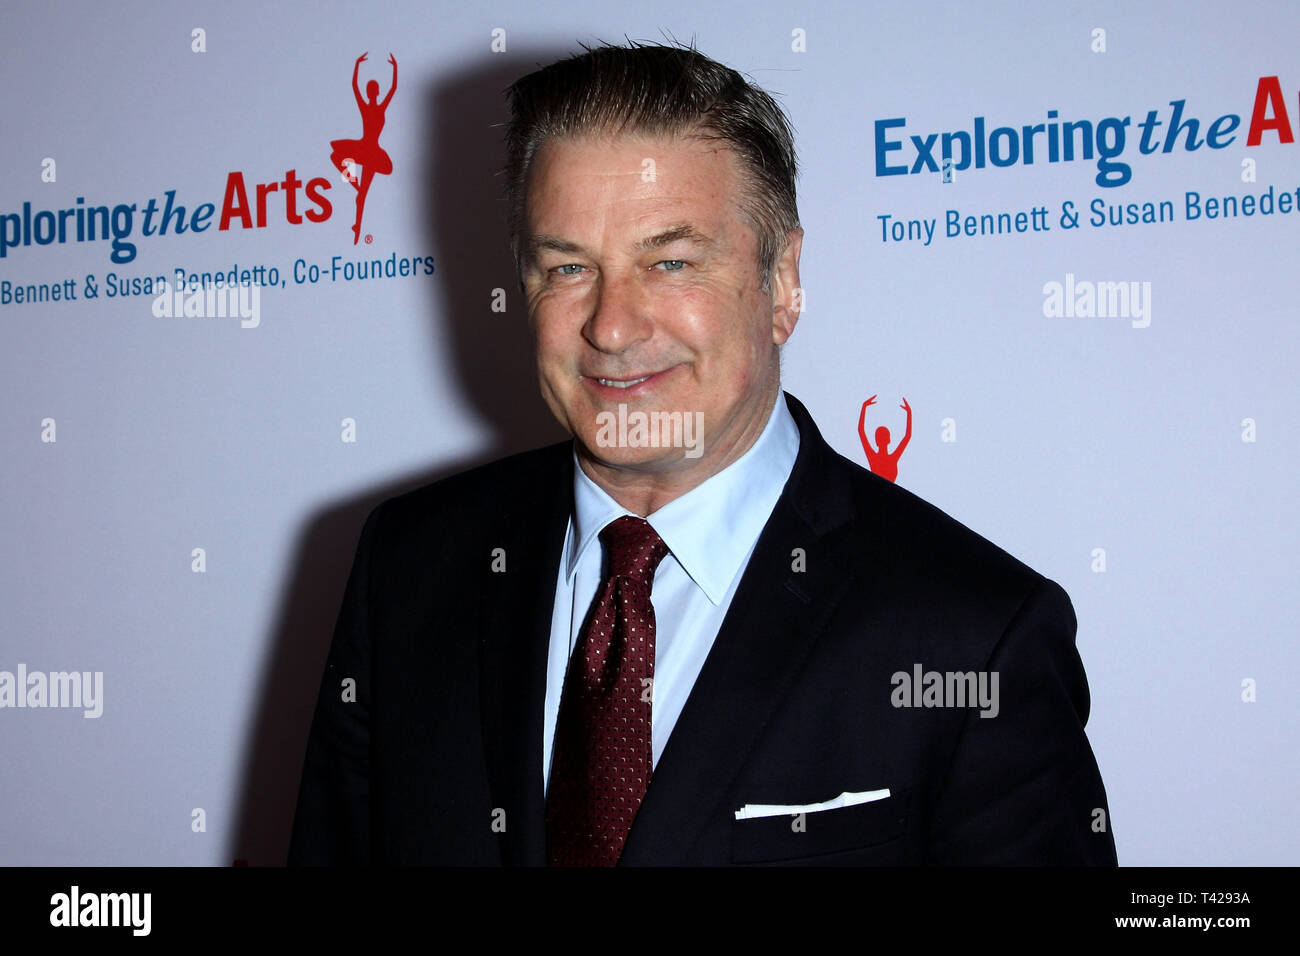 New York, USA. 12 Apr, 2019.  Alec Baldwin at The Exploring the Arts 20th Anniversary Gala, Hosted by Alex Baldwin at The Hammerstein Ballroom on April 12, 2019 in New York, NY. Credit: Steve Mack/S.D. Mack Pictures/Alamy Stock Photo